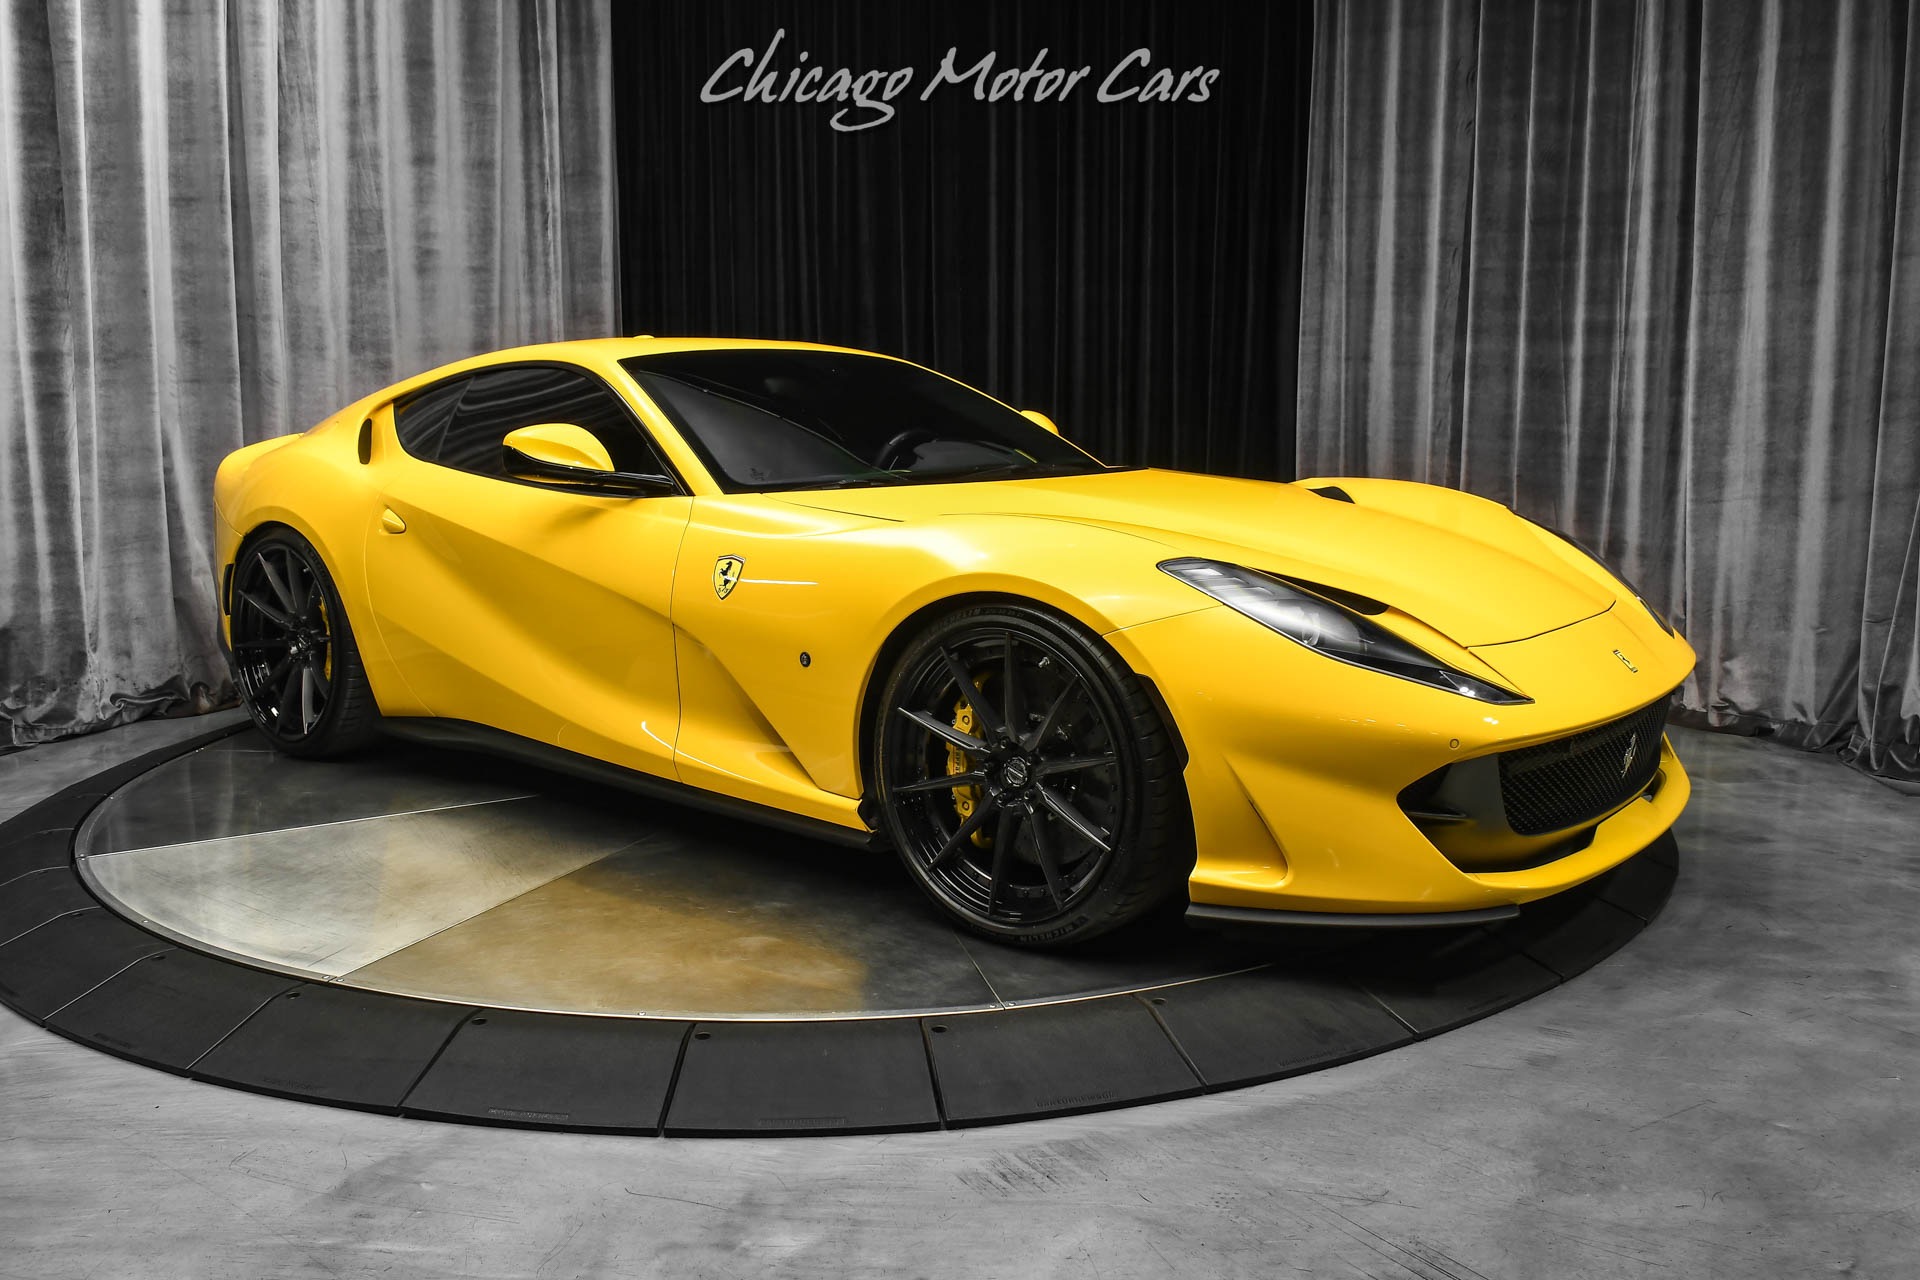 Used-2018-Ferrari-812-Superfast-Only-8K-Miles-Carbon-Race-Seats-Front-Lift-Carbon-Wheel-W-LEDs